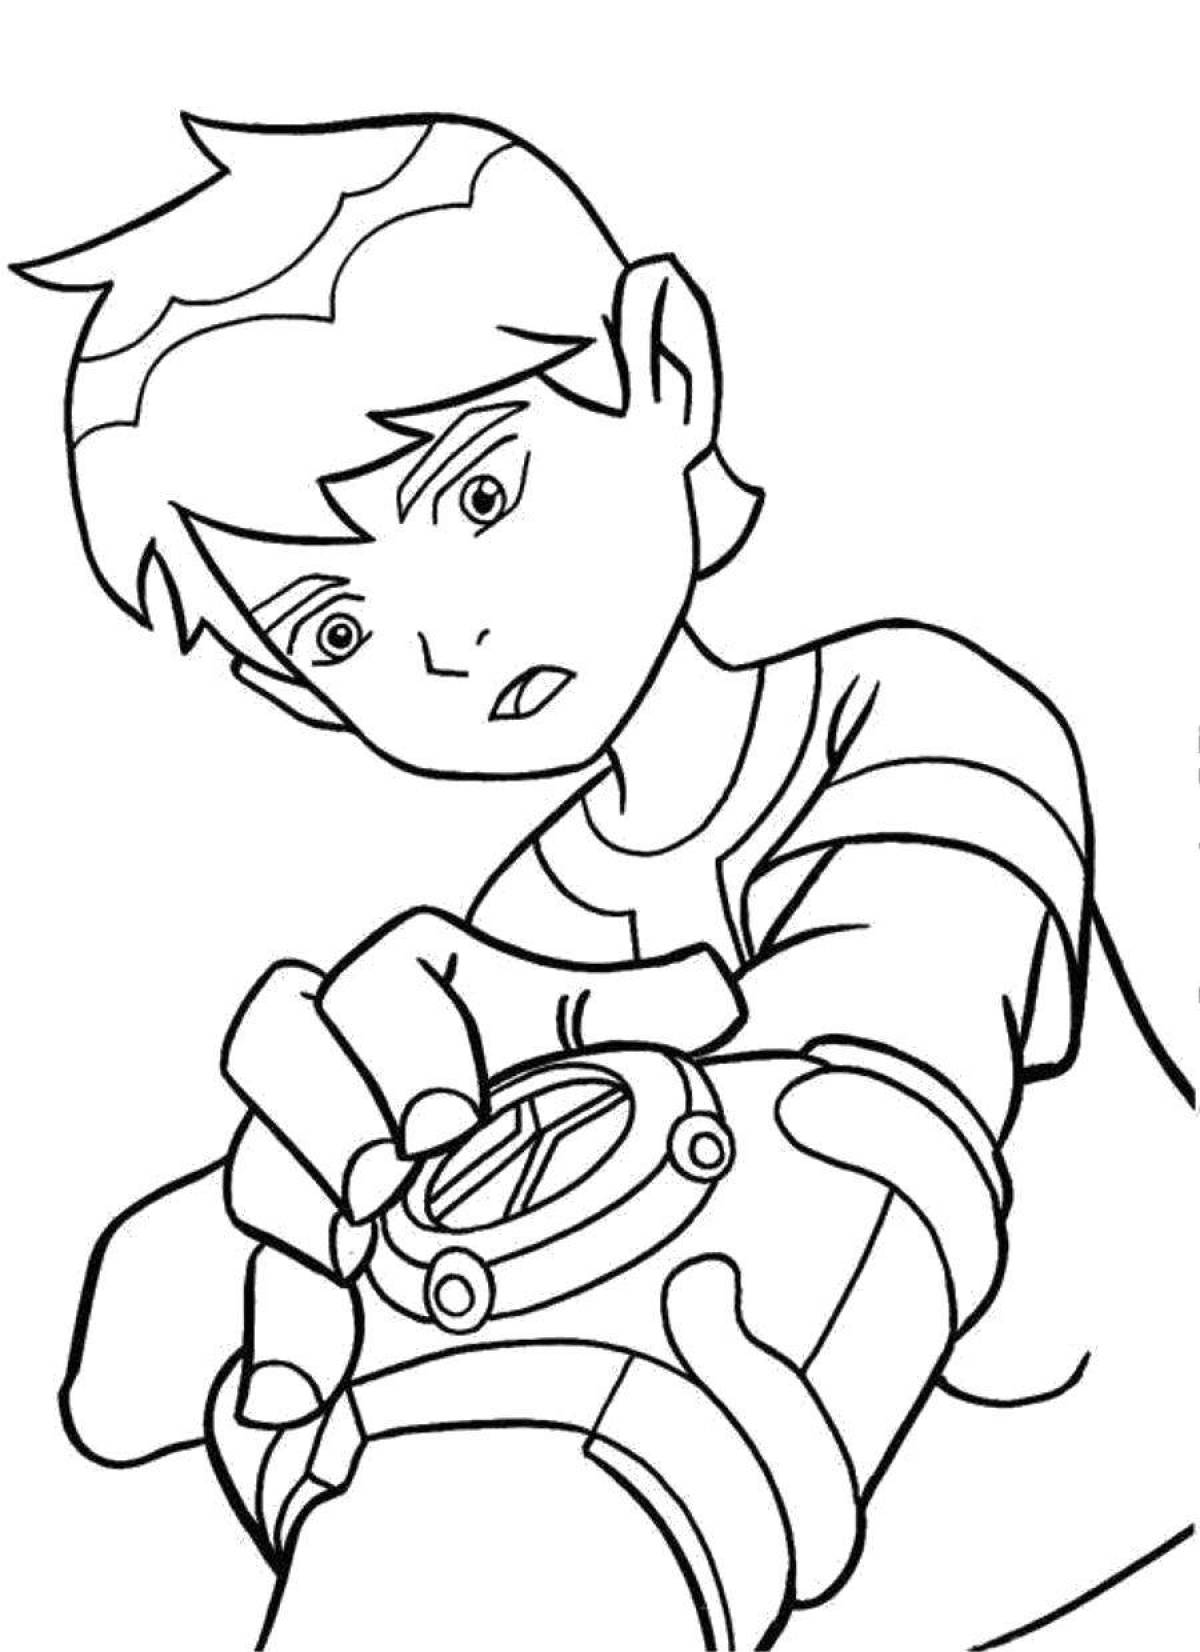 Awesome brawl star coloring page